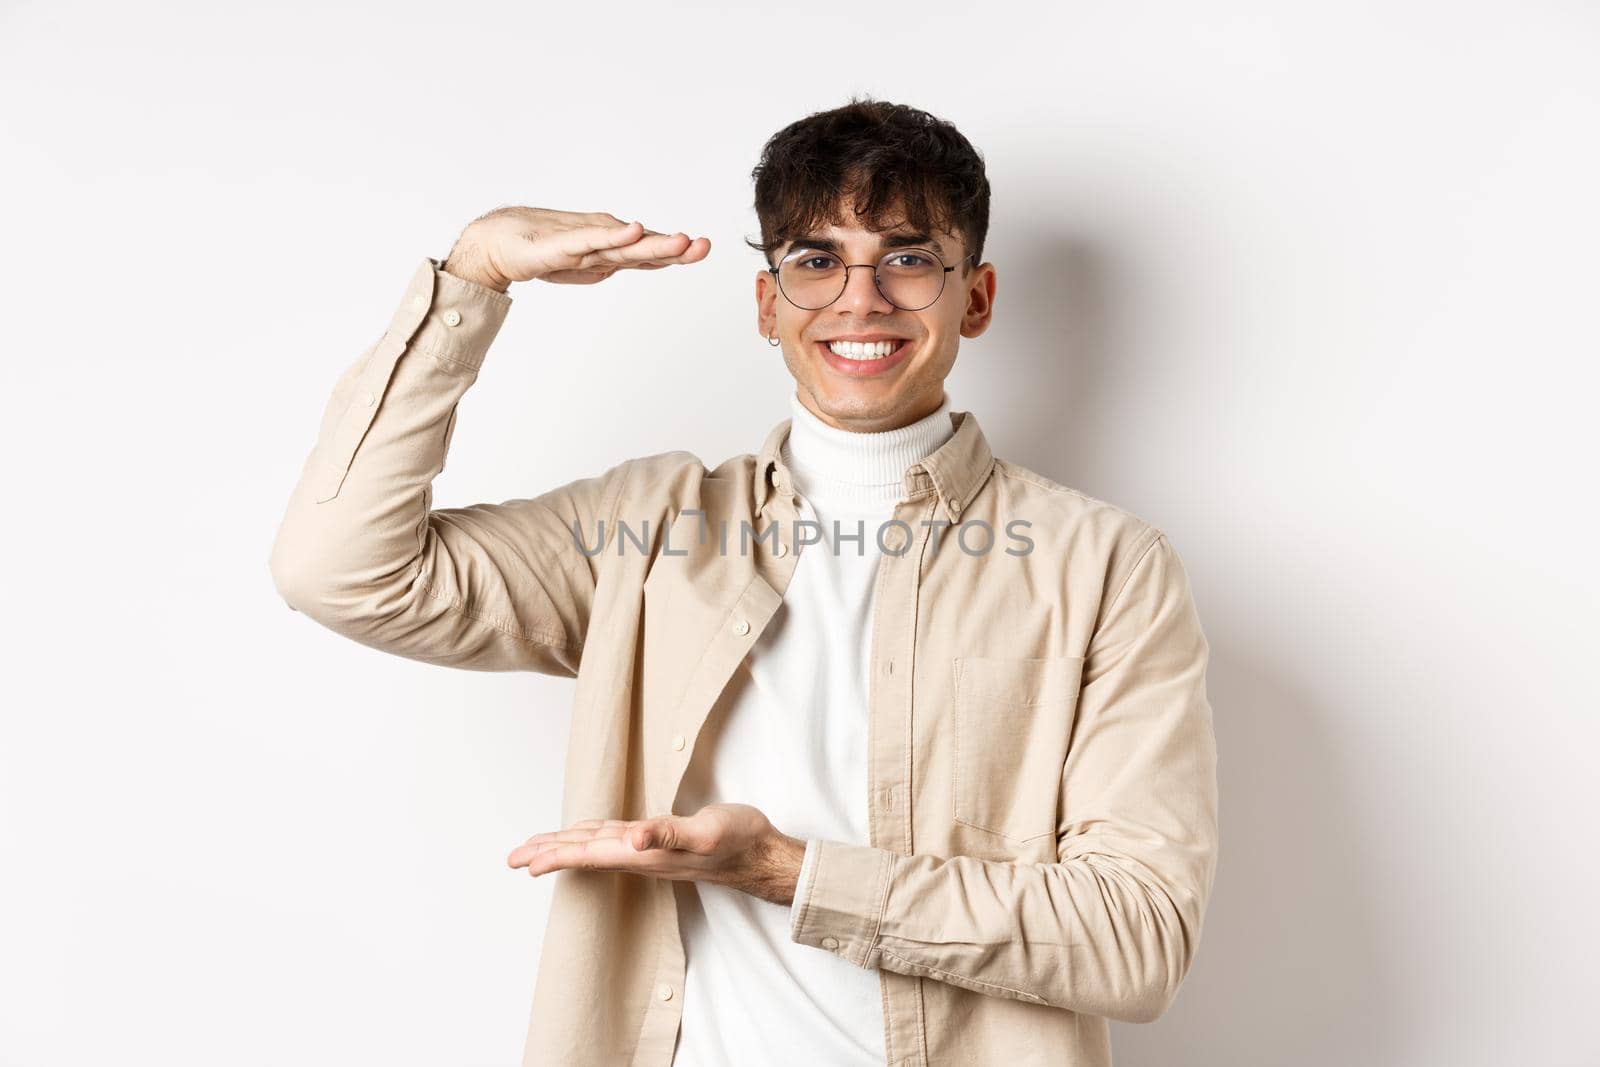 Real people. Happy modern guy in glasses showing big size, shaping box and smiling, showing something large, standing on white background.